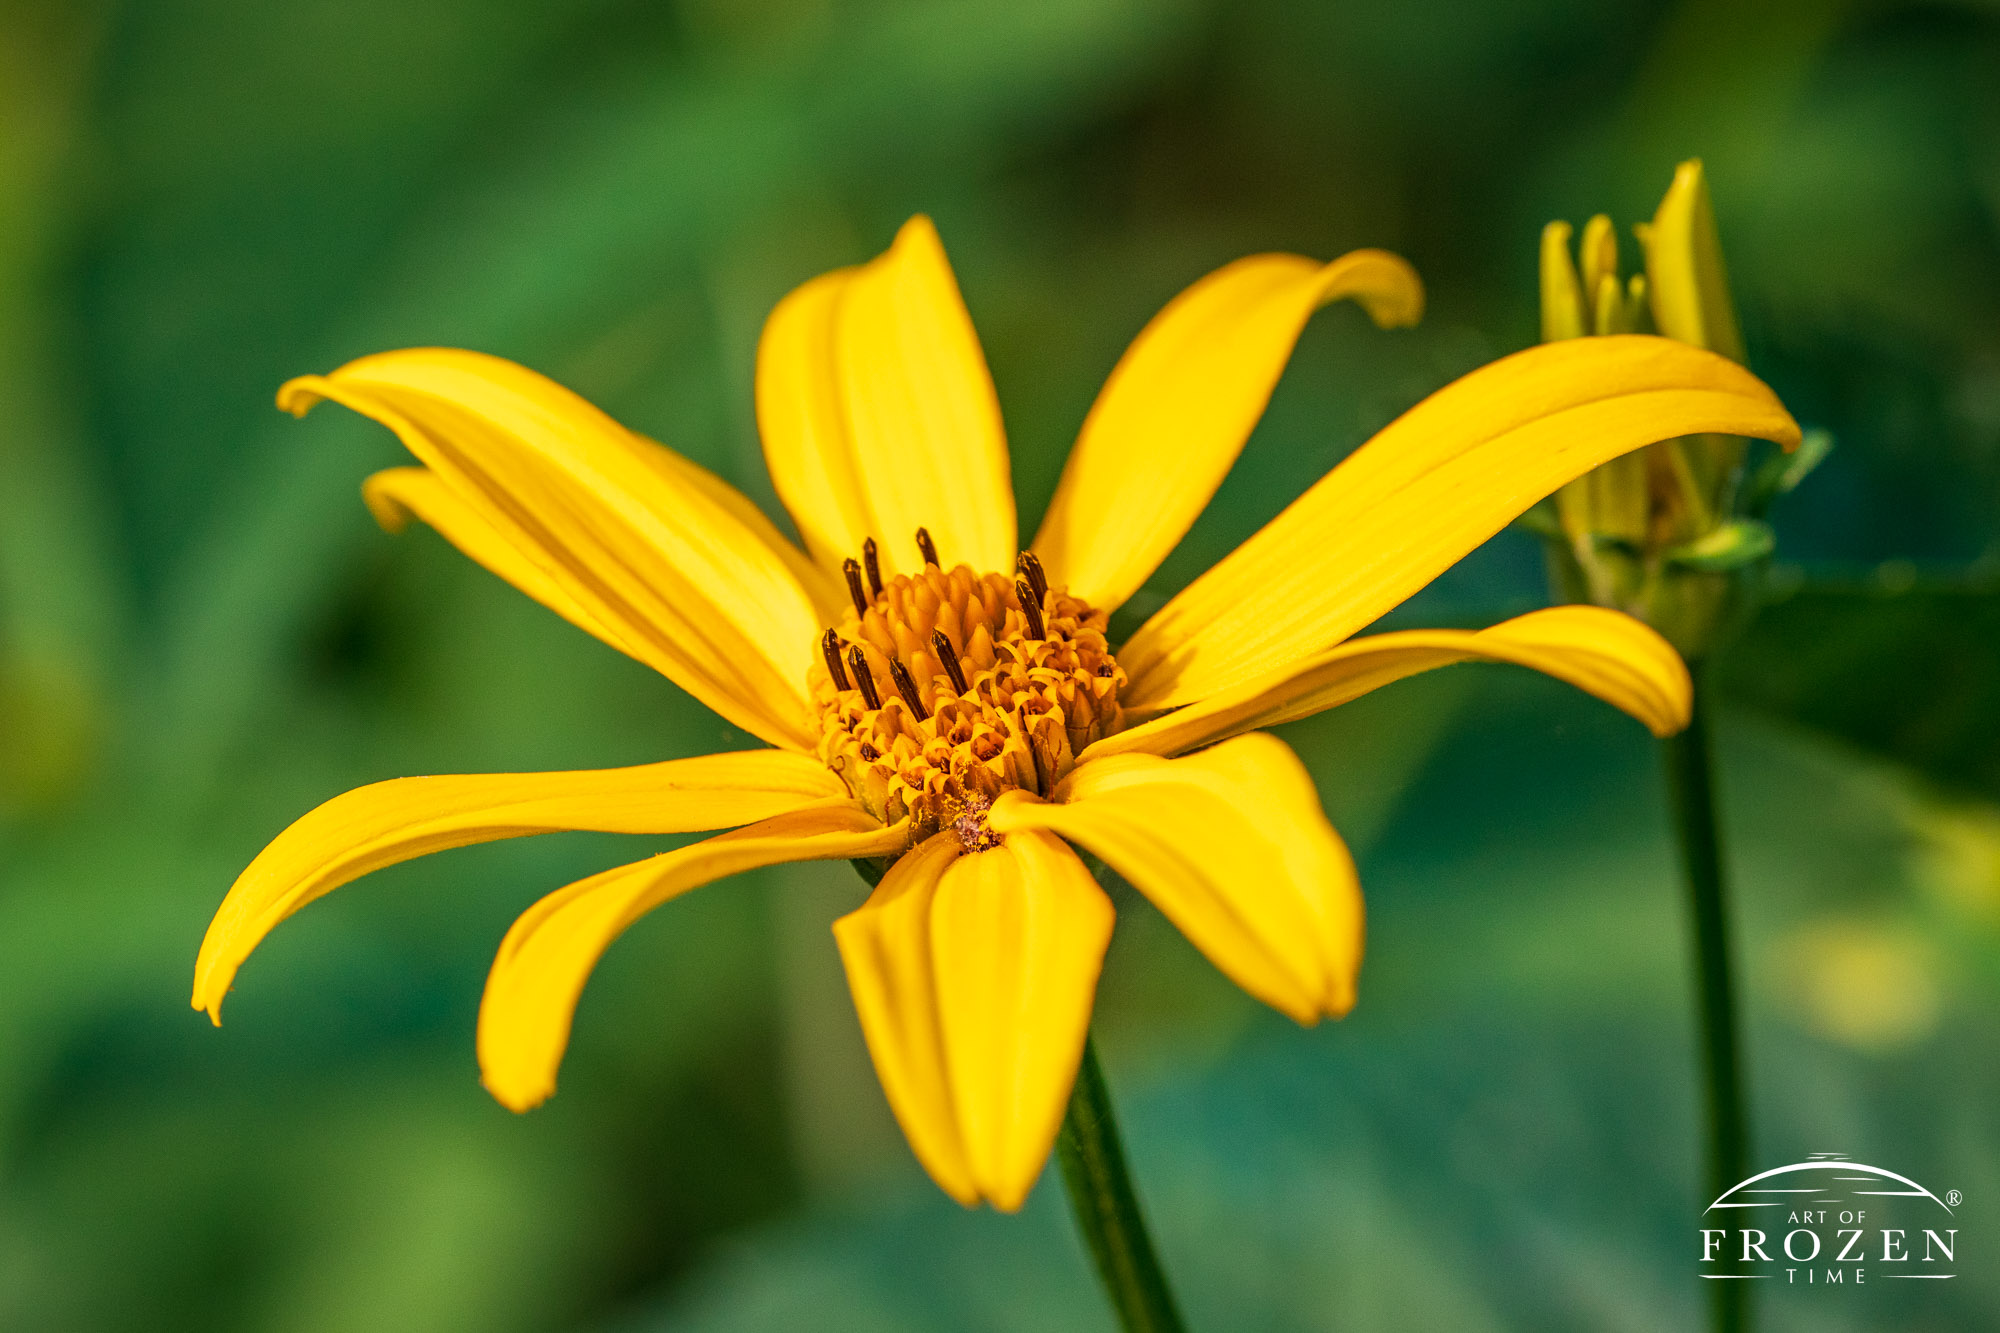 A close up image of the Ox-eye Sunflower captured in warm evening light